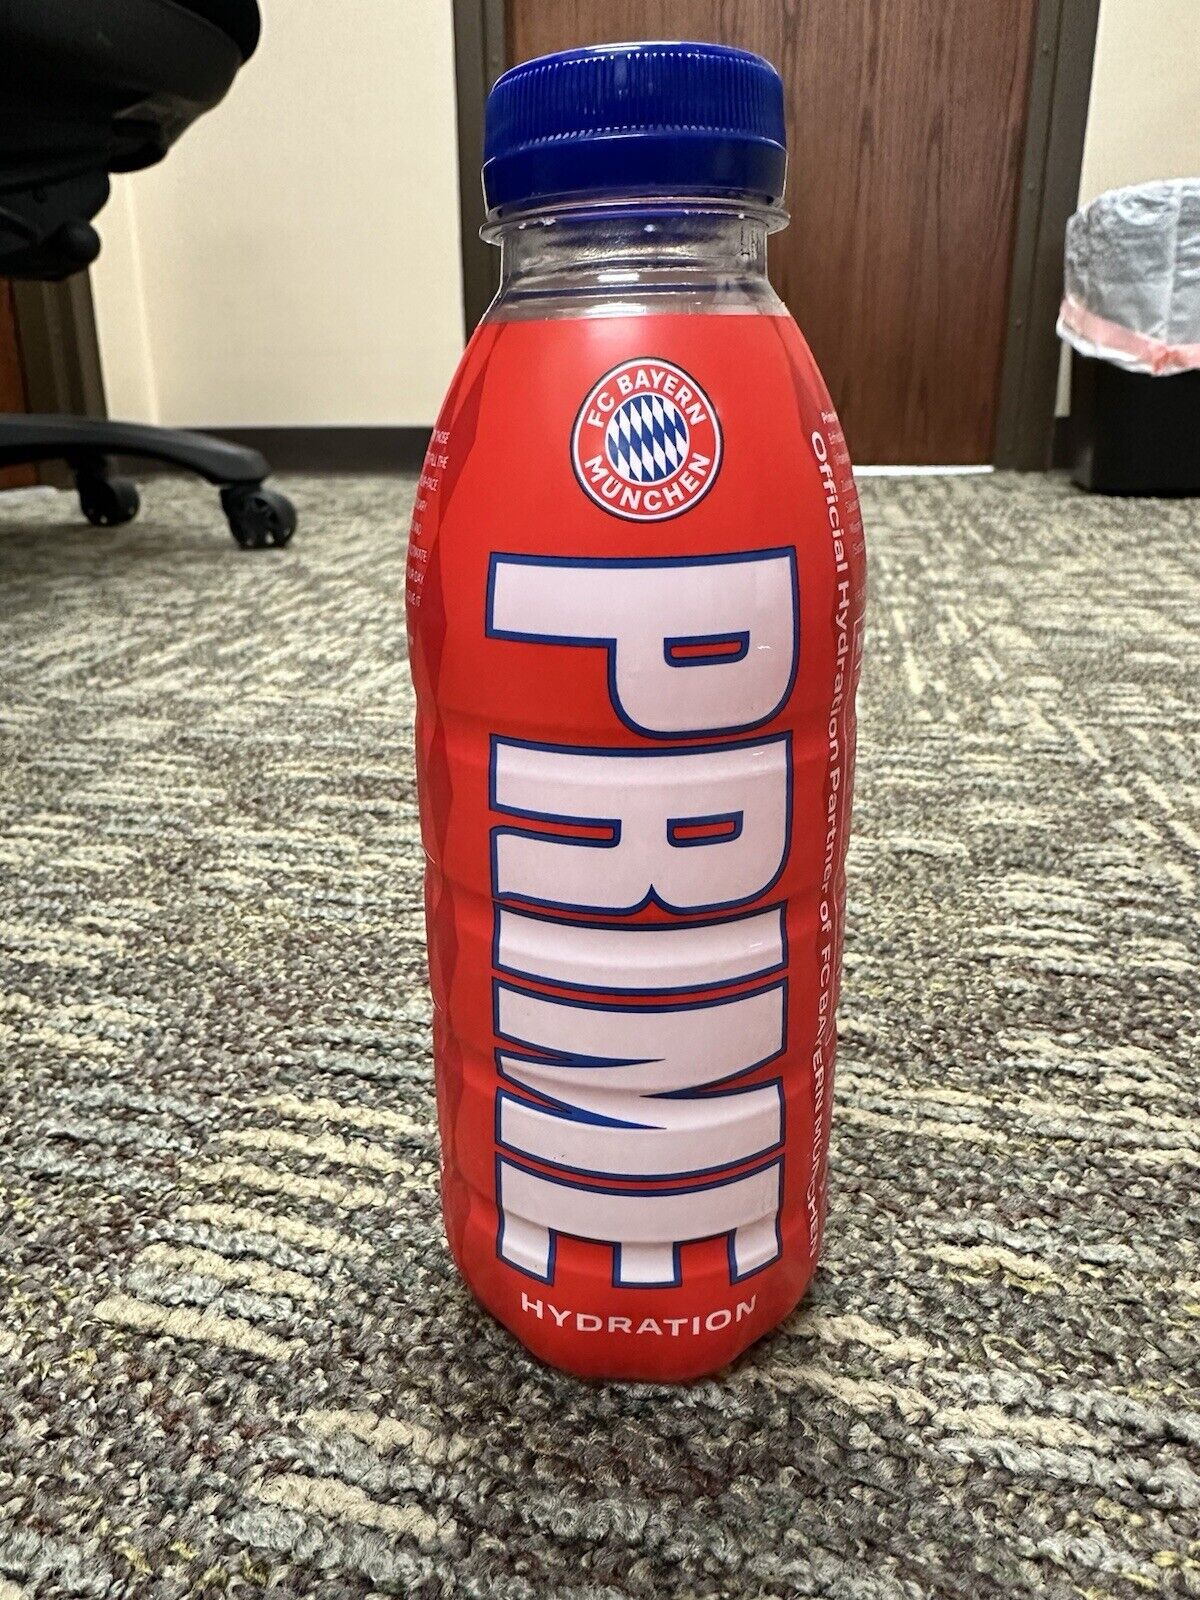 FC Bayern Munchen Prime Hydration;  On hand in TN in US